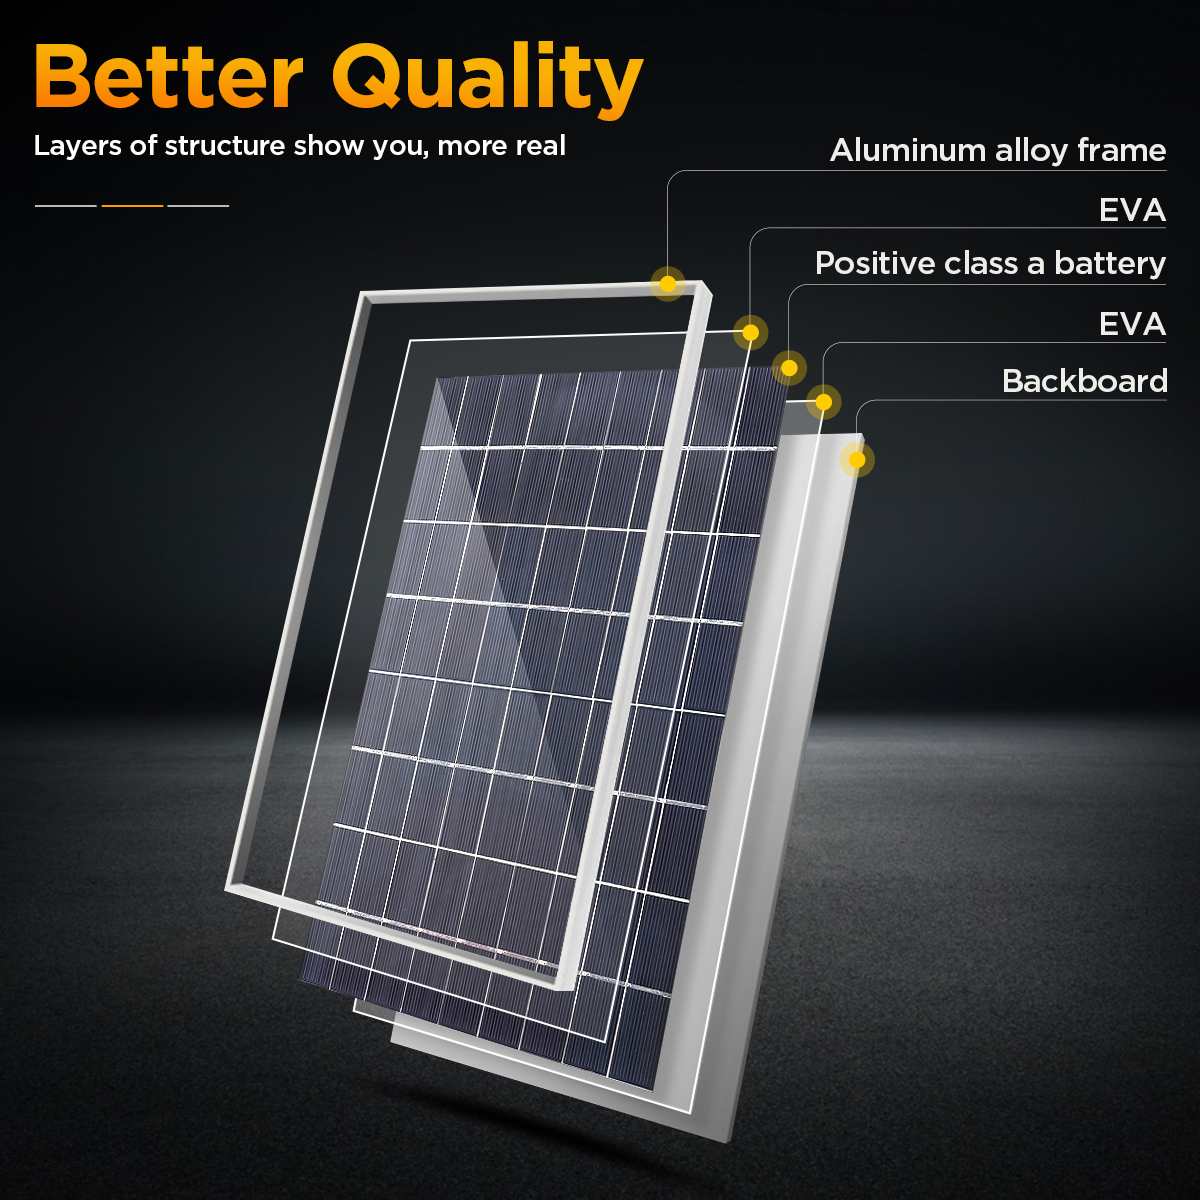 300W Solar Panel, Better Quality Layers of structure show you; more real Aluminum alloy frame